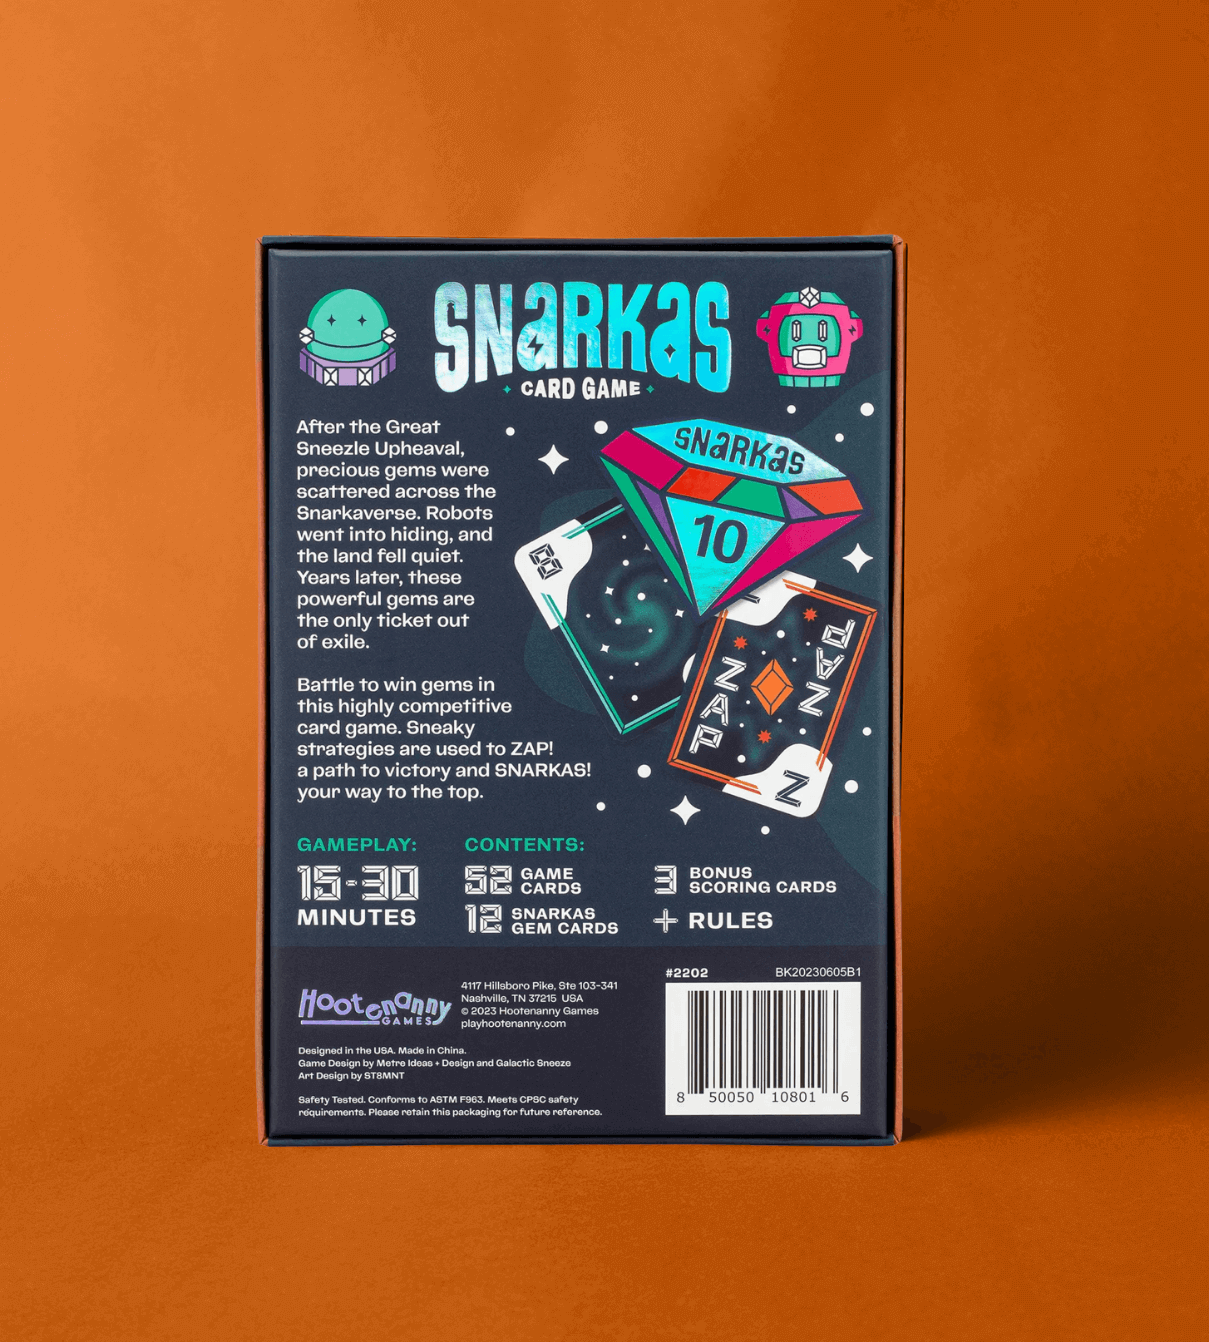 Snarkas card game back cover displayed as part of the package design by ST8MNT on orange background